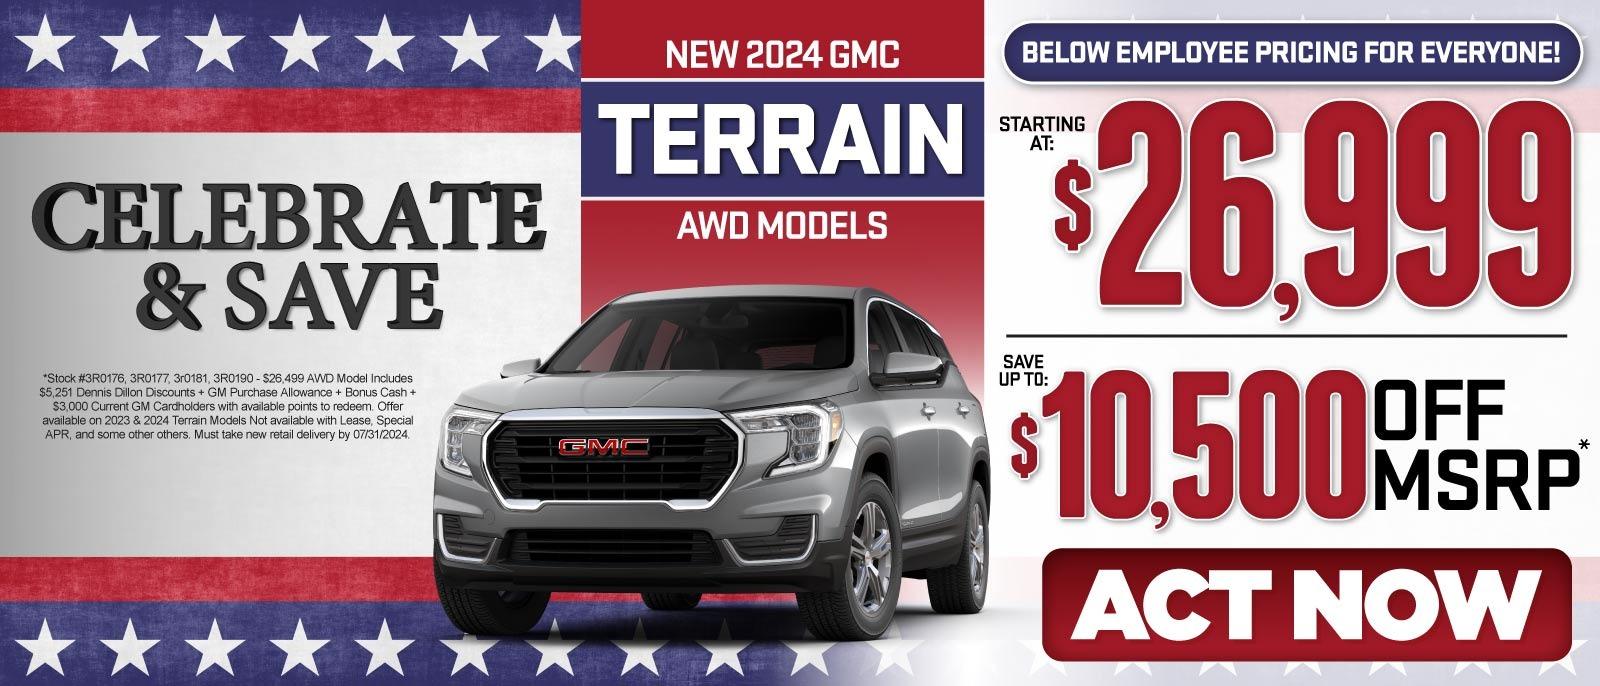 New 2024 GMC Terrain AWD Models - Below Employee Pricing For Everyone! | Starting At: $26,999 | Save Up To: $10,500 Off MSRP* — Act Now